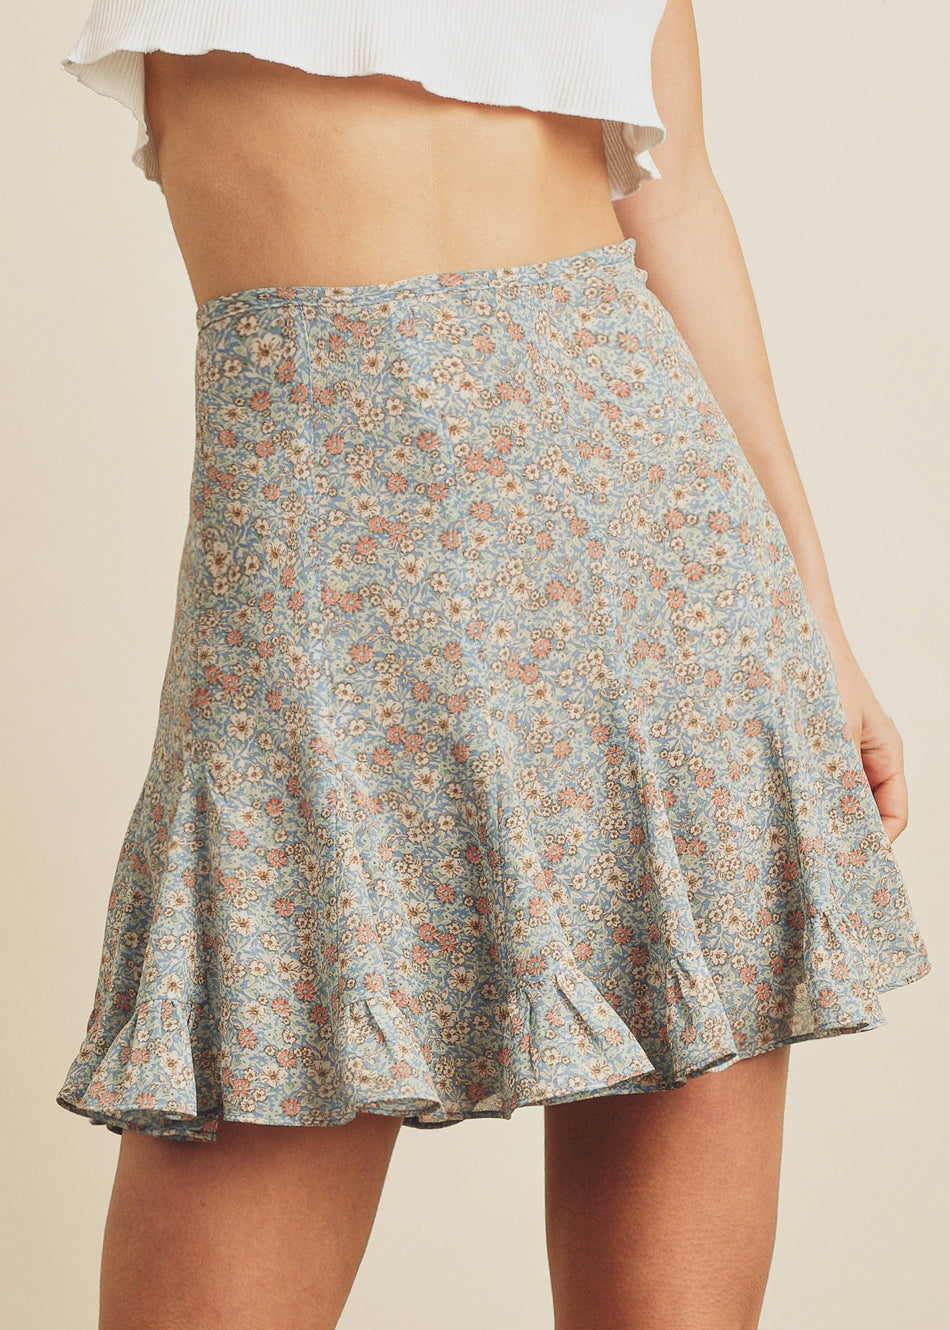 Baby Blue Floral Skirt Shorts